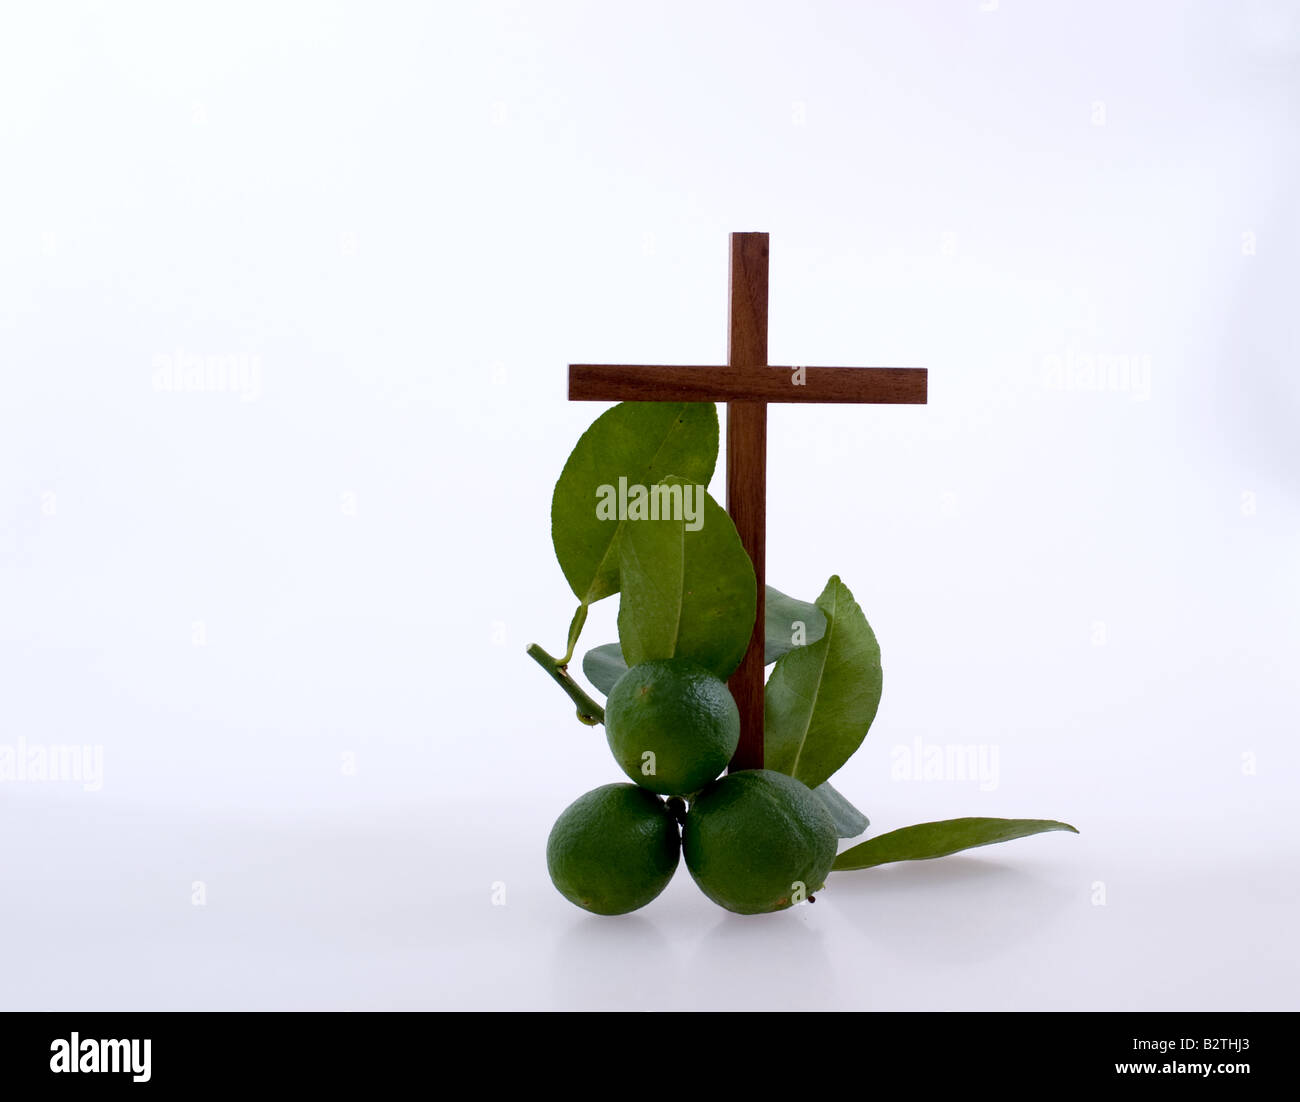 Wooden Christian Cross with a key lime branch and green keylimes and leaves Stock Photo